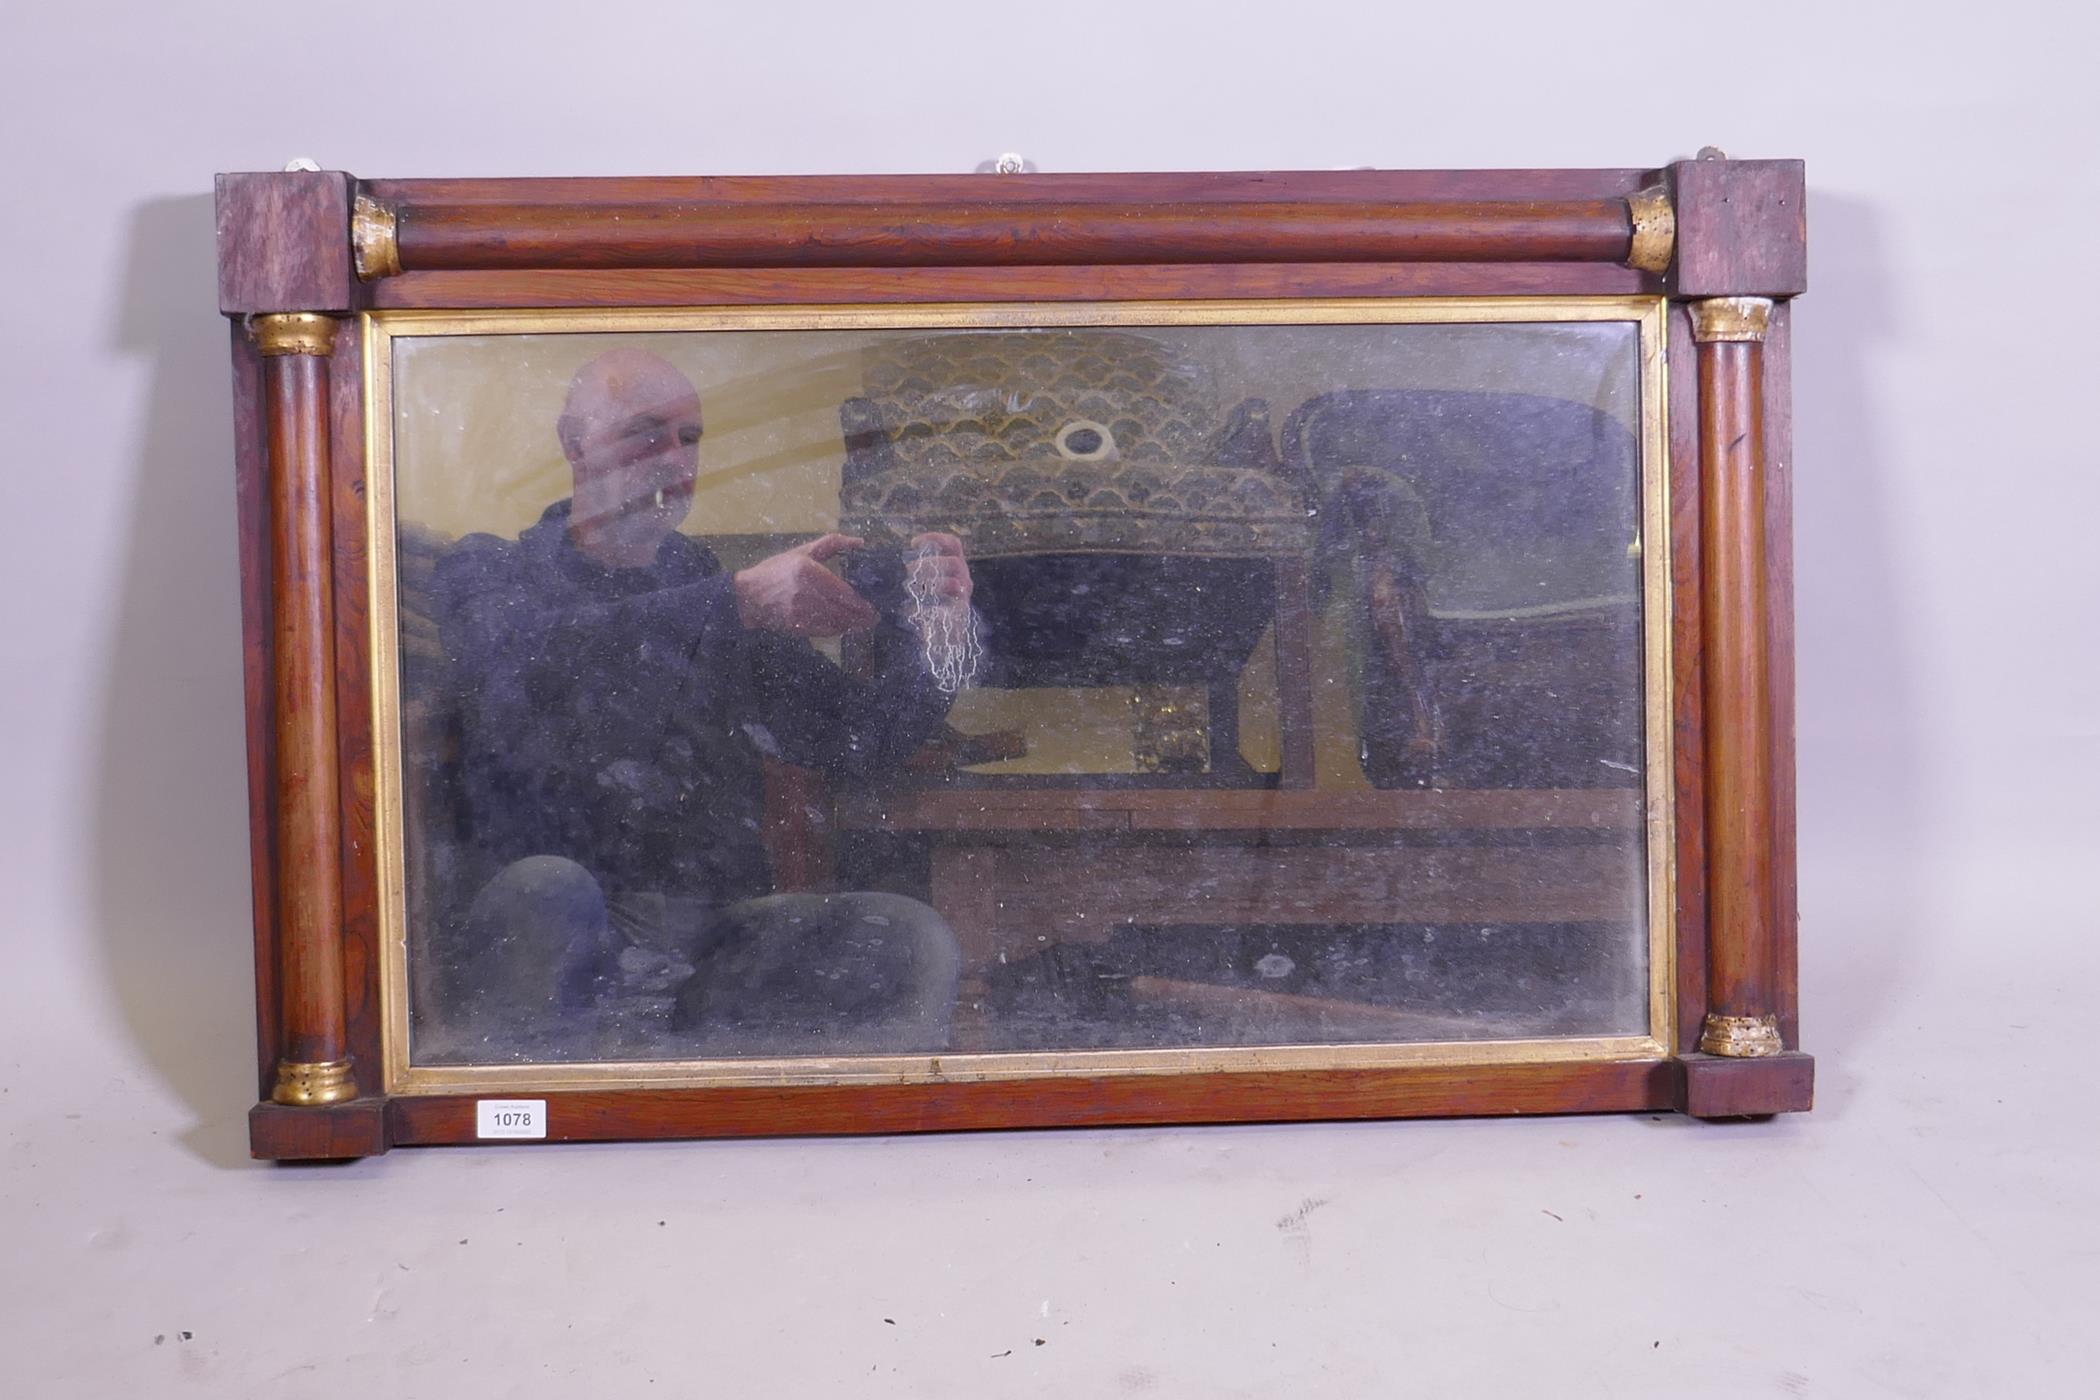 A William IV rosewood and parcel gilt over mantel mirror, 80 x 56cm